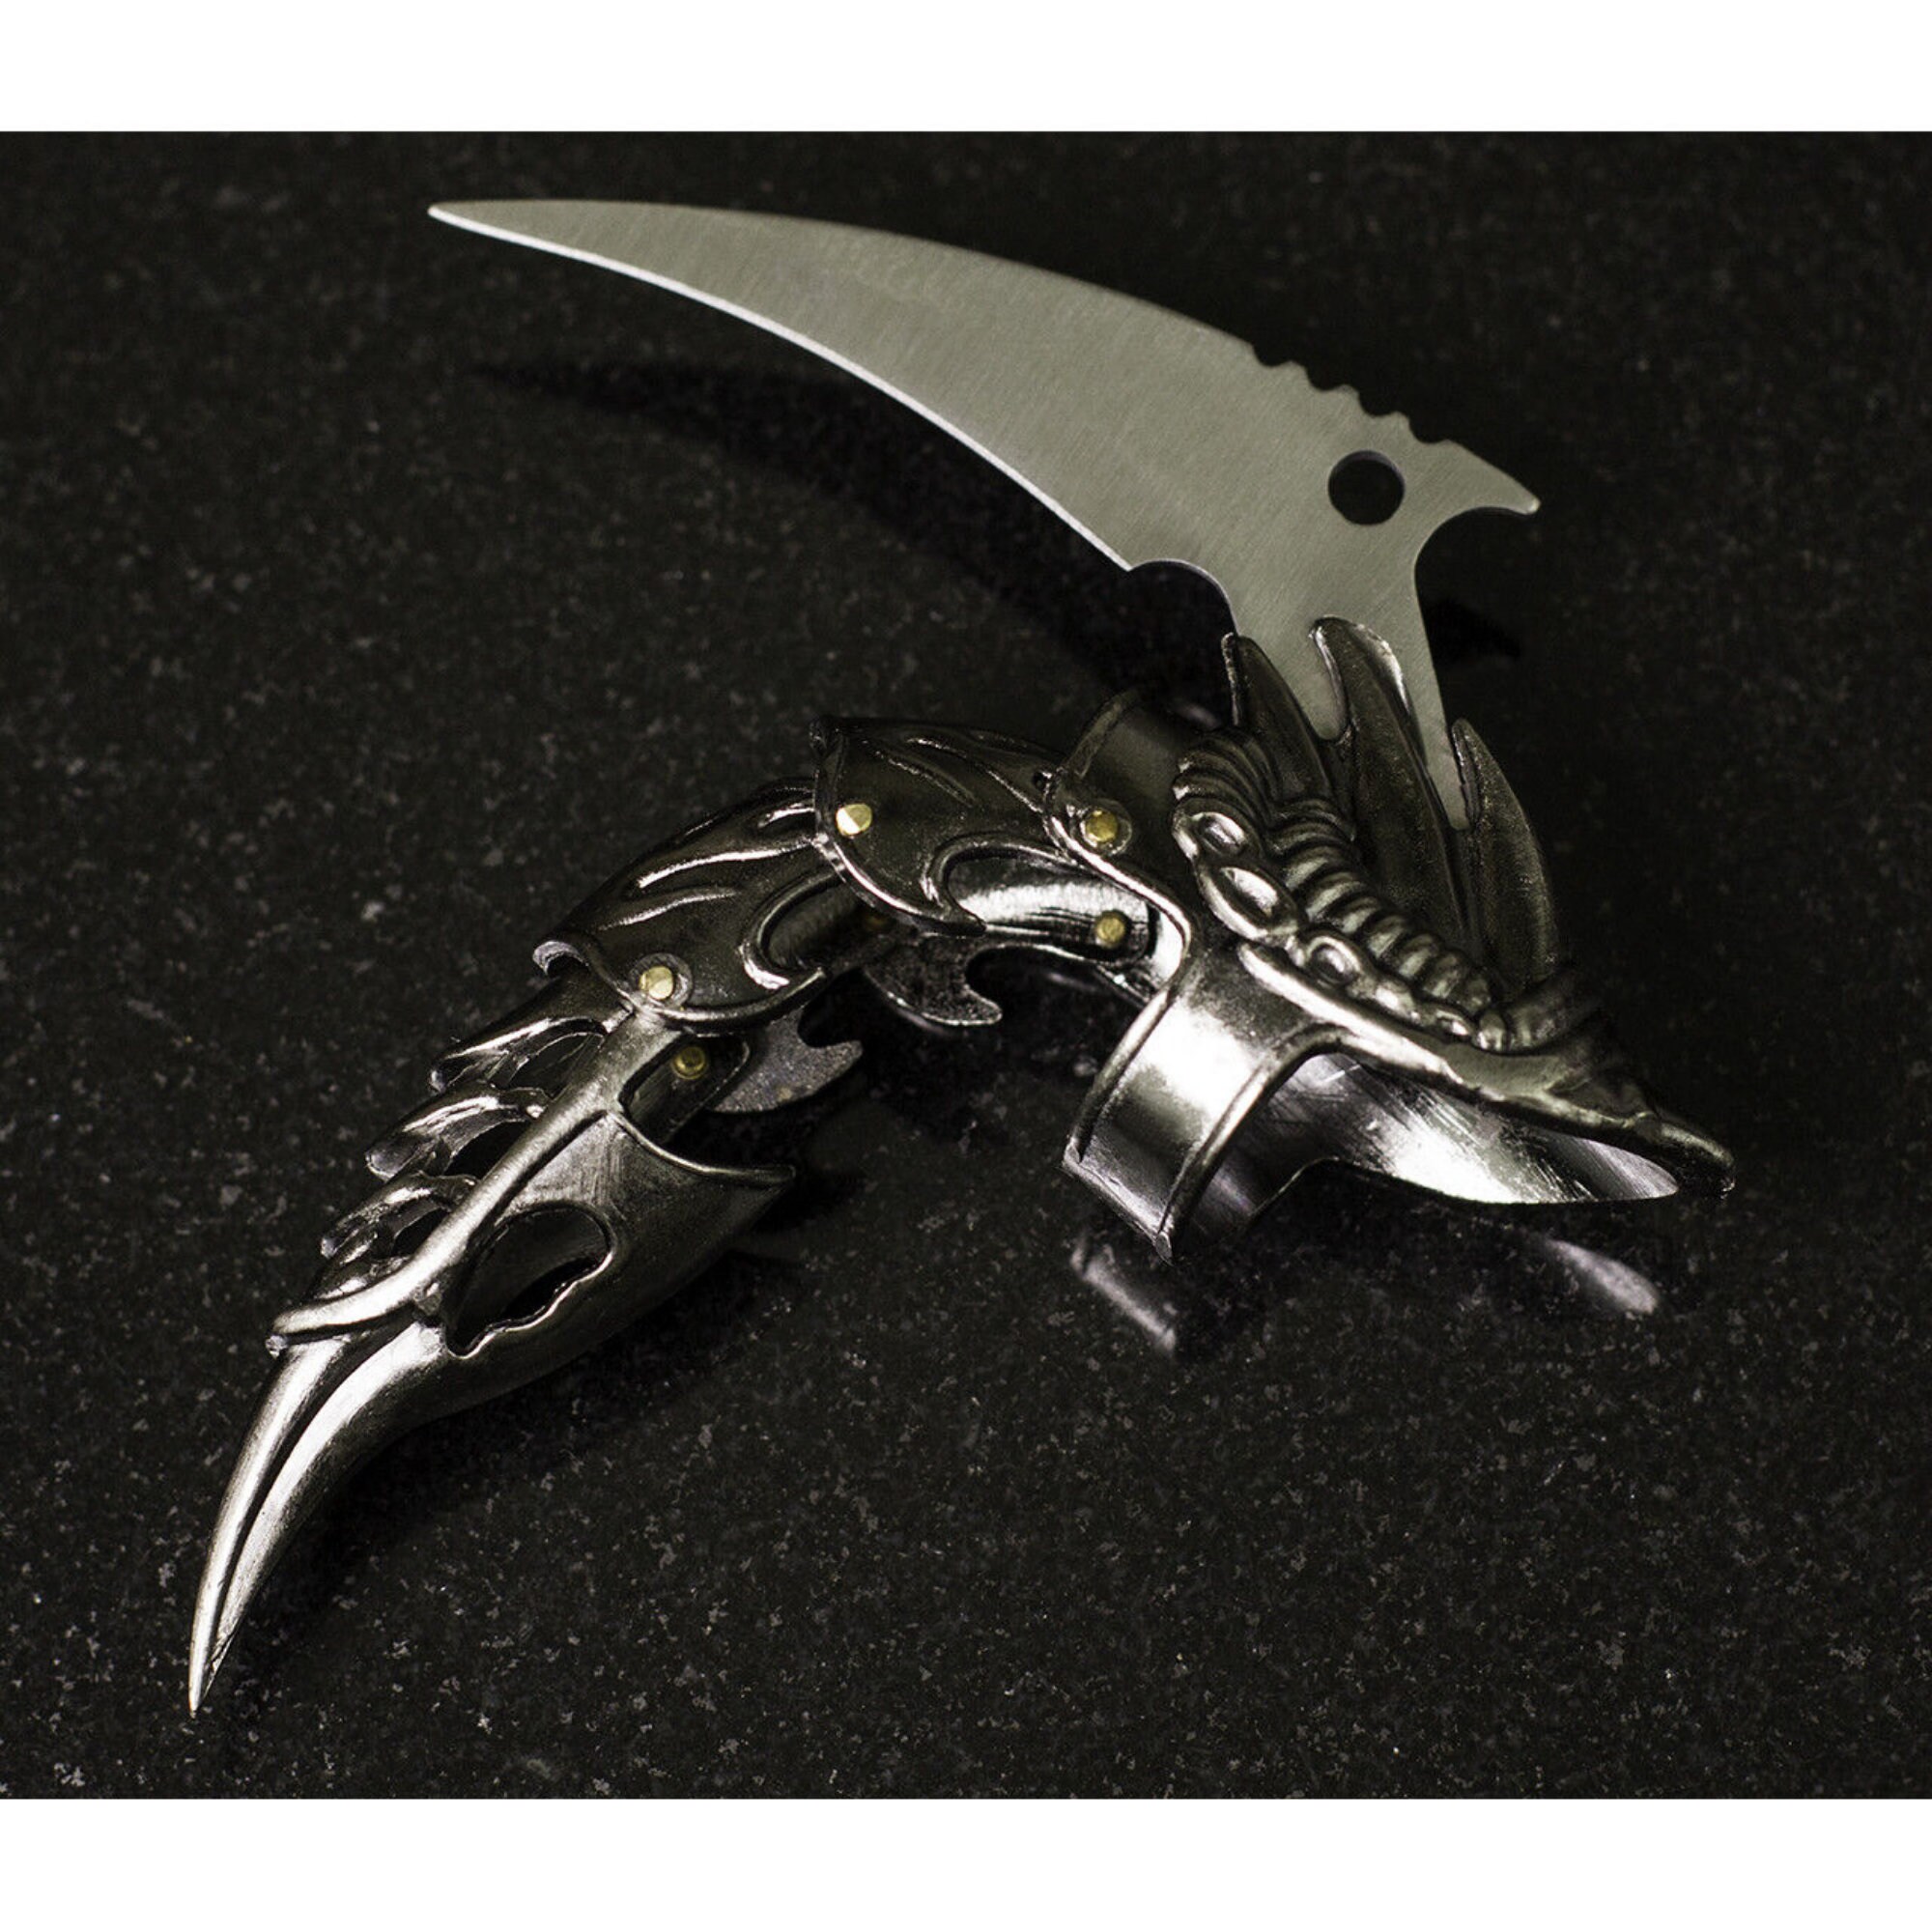 Iron Reaver Claw Knife, Black – Midwest Martial Arts Supply